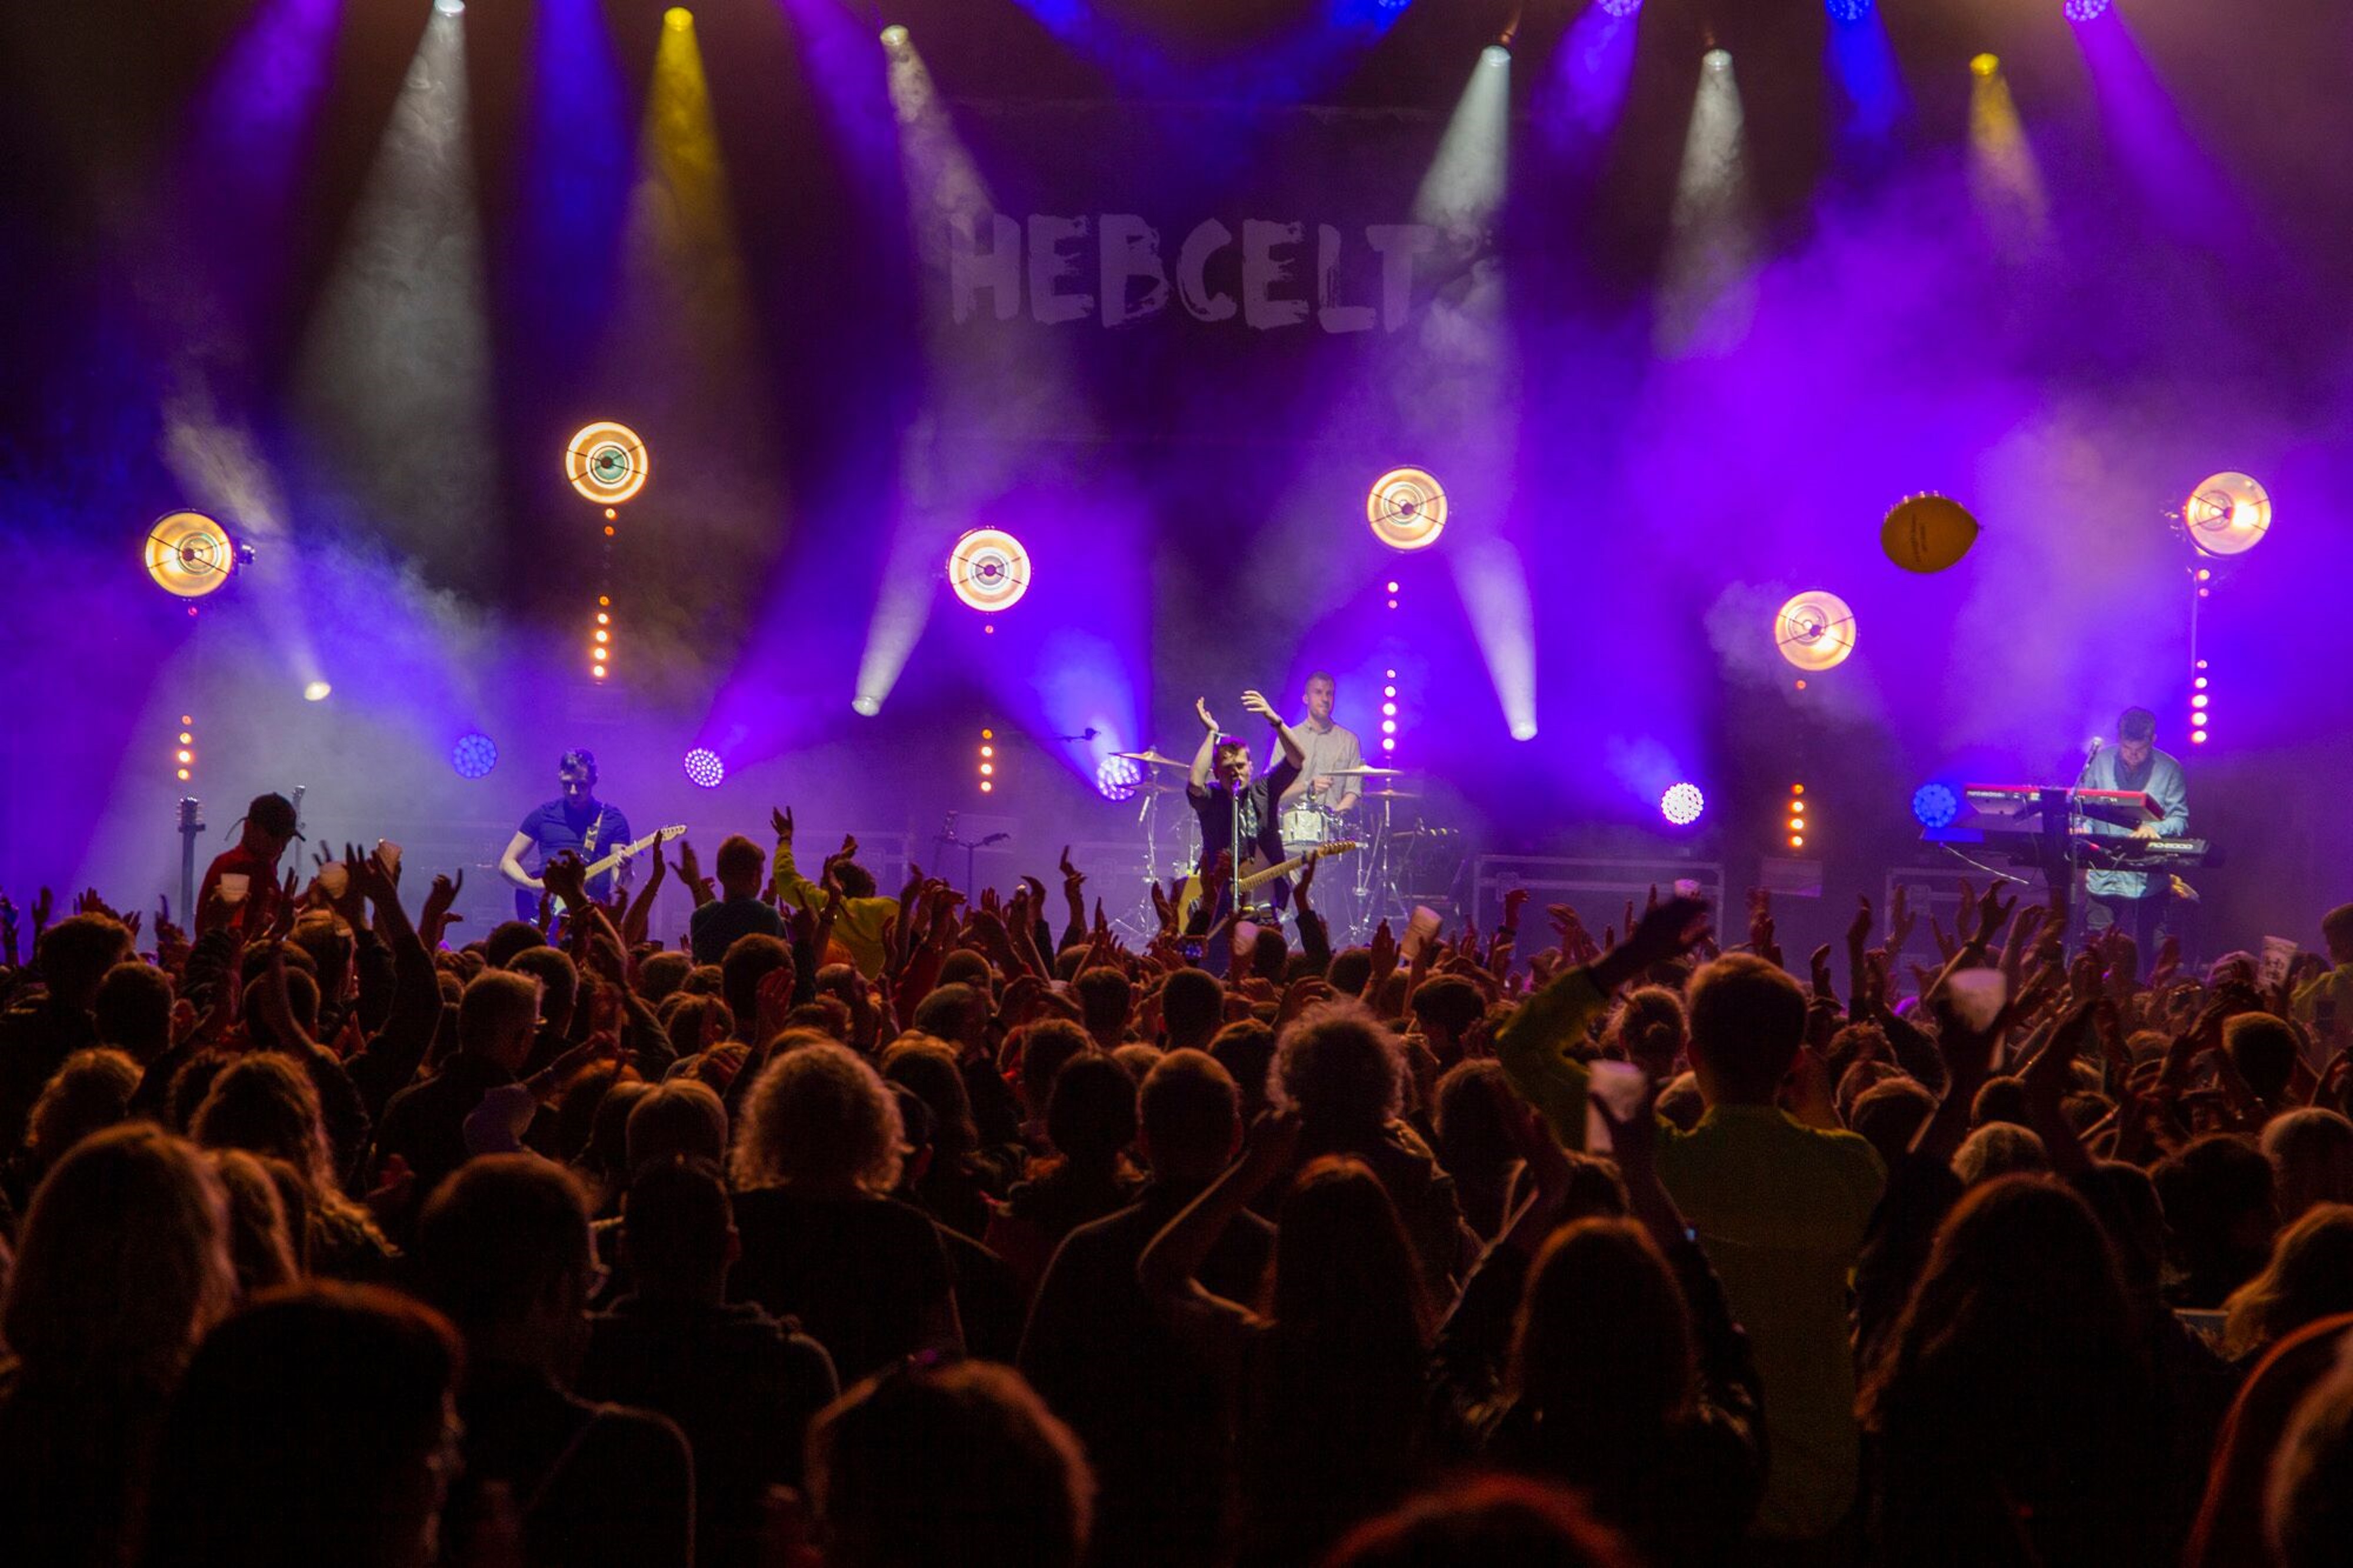 Tide Lines headlined the HebCelt 2019 festival after playing at the previous two years events. Picture by Fiona Rennie.